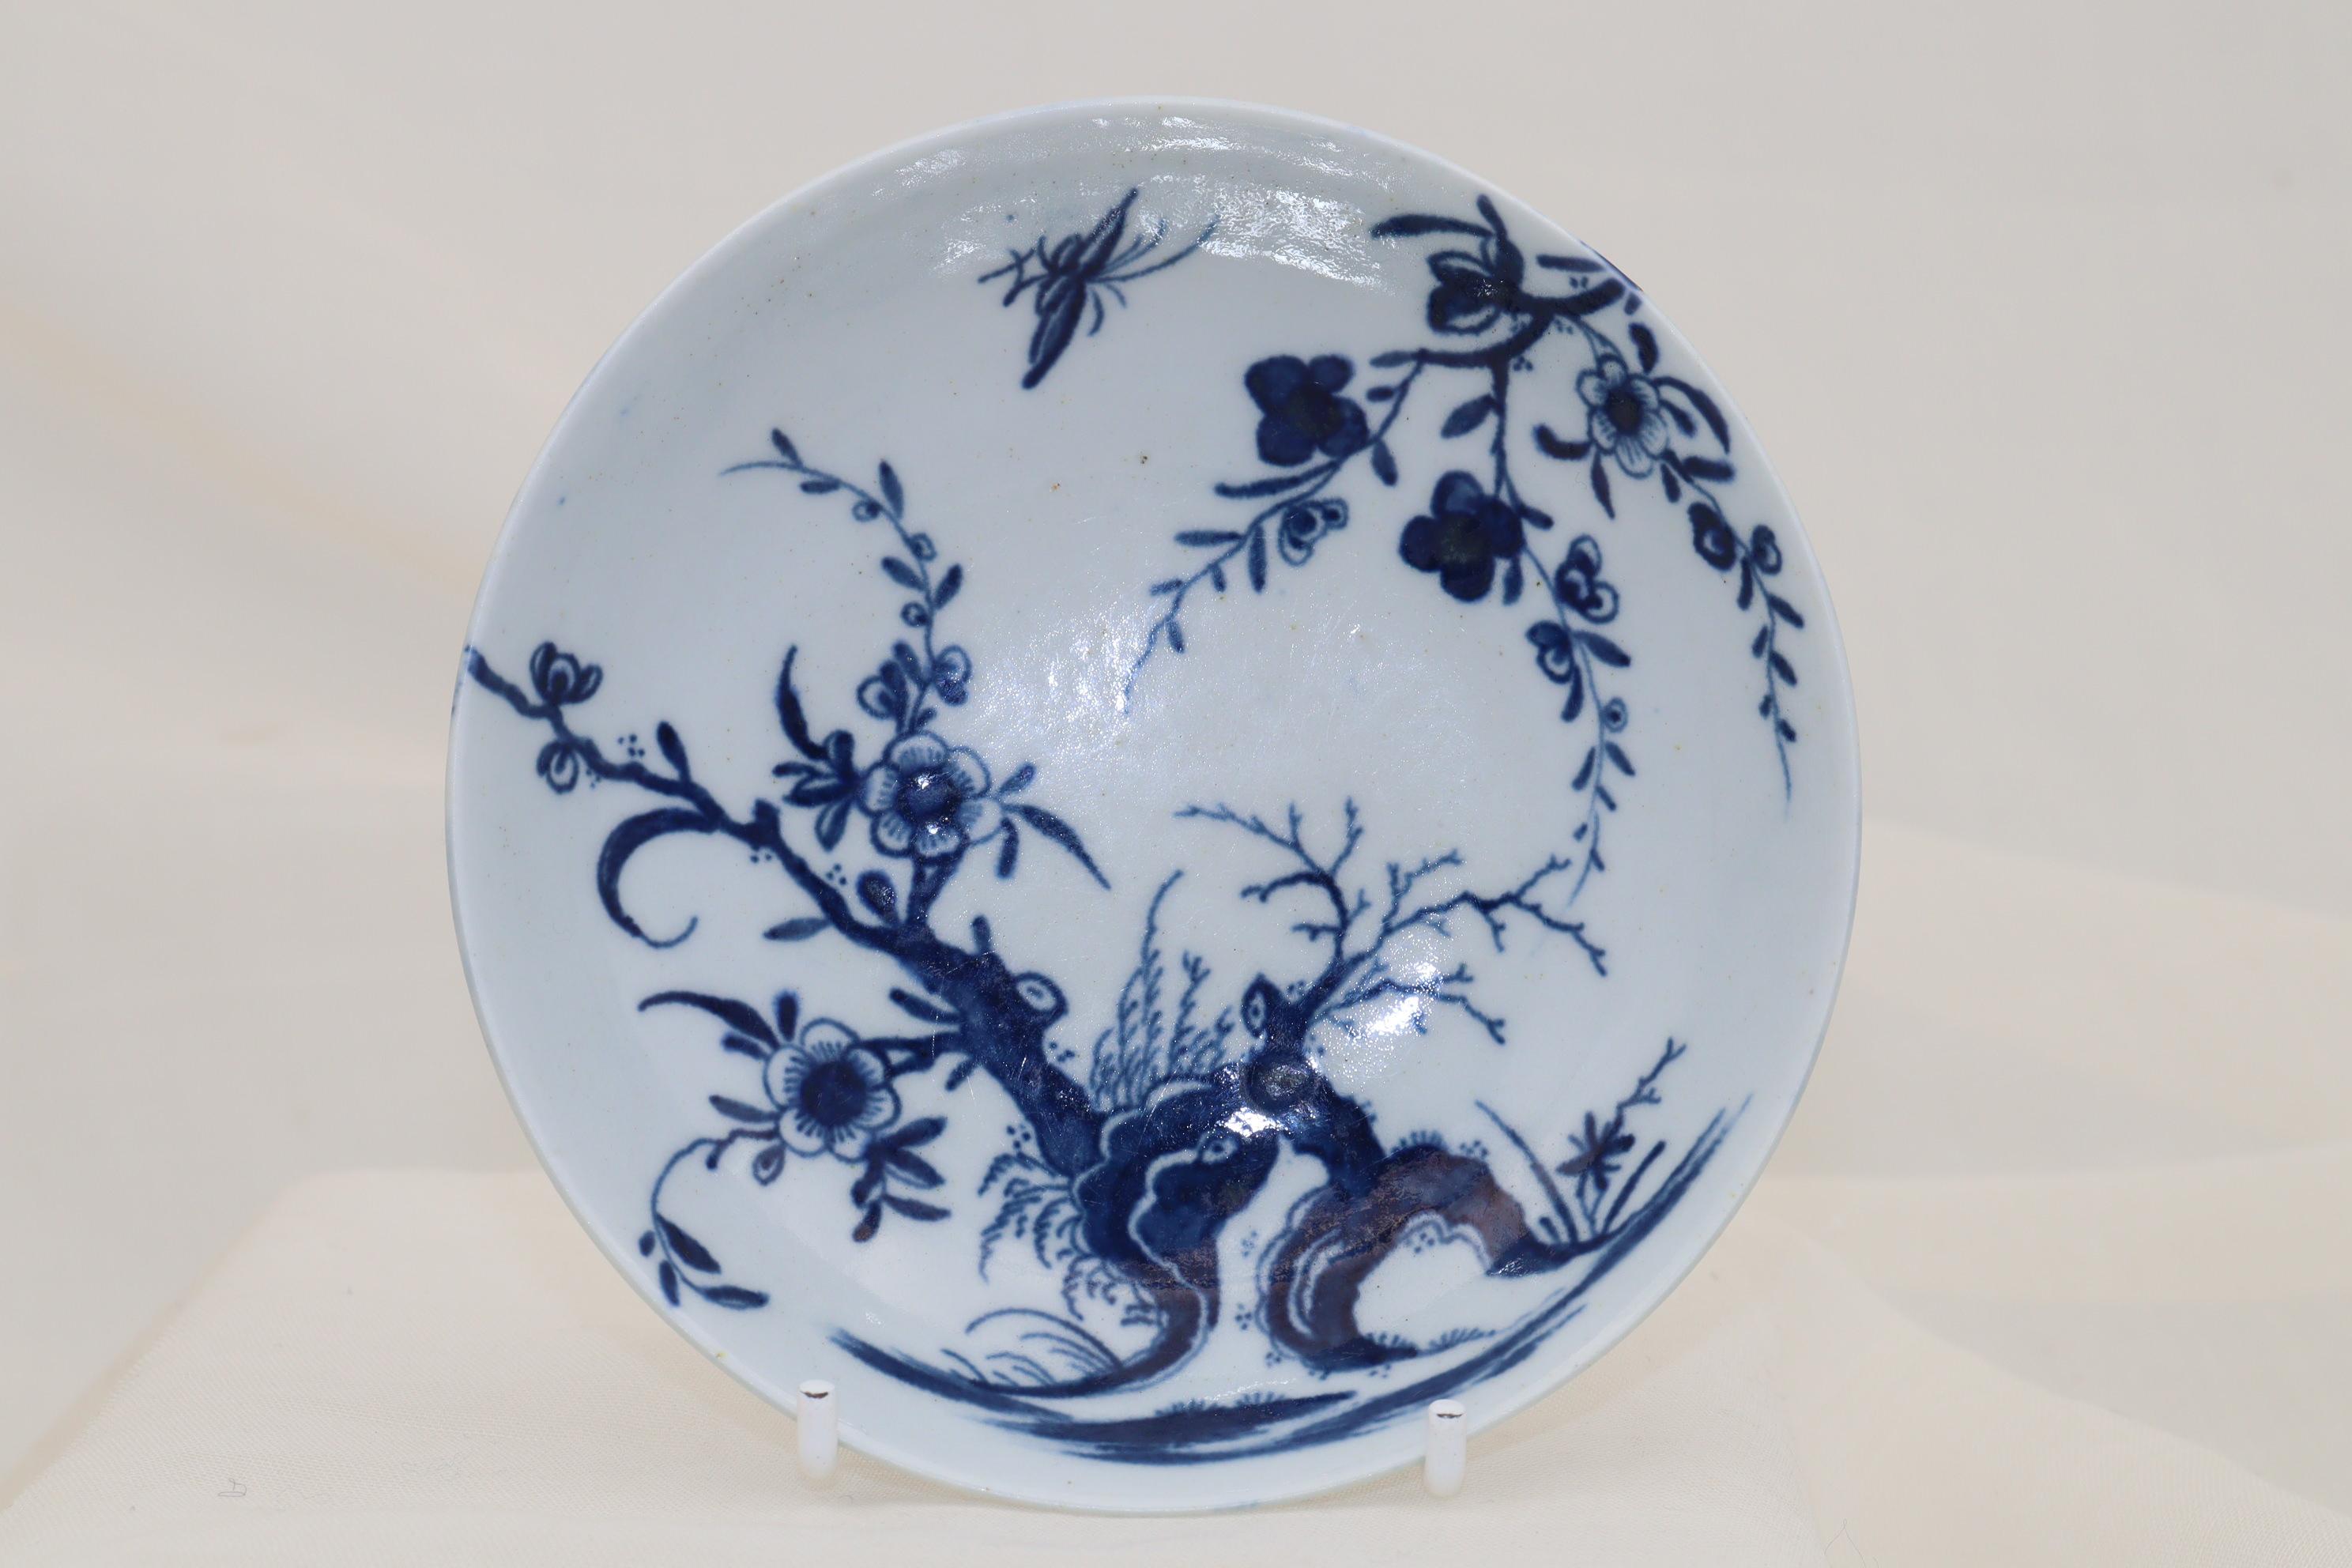 This First period Worcester porcelain tea bowl & saucer is decorated with the hand painted blue and white 